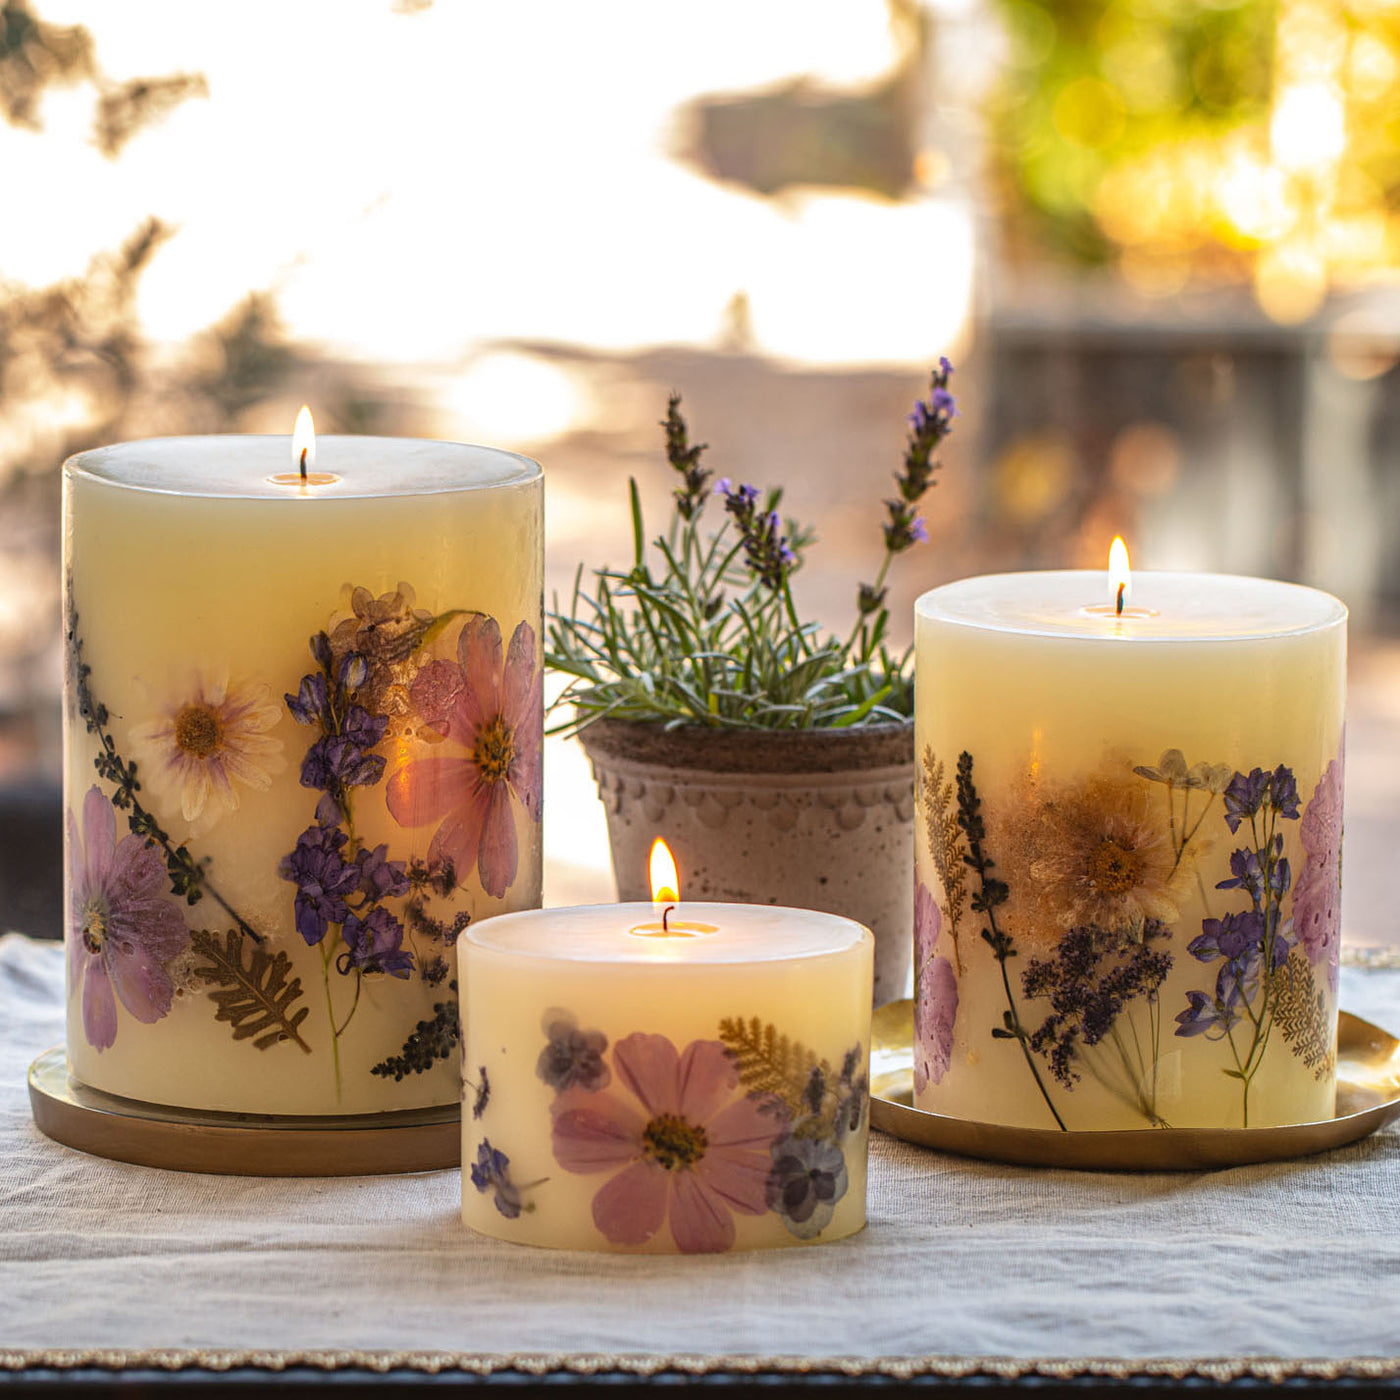 Roman Lavender Small Round Botanical Candle